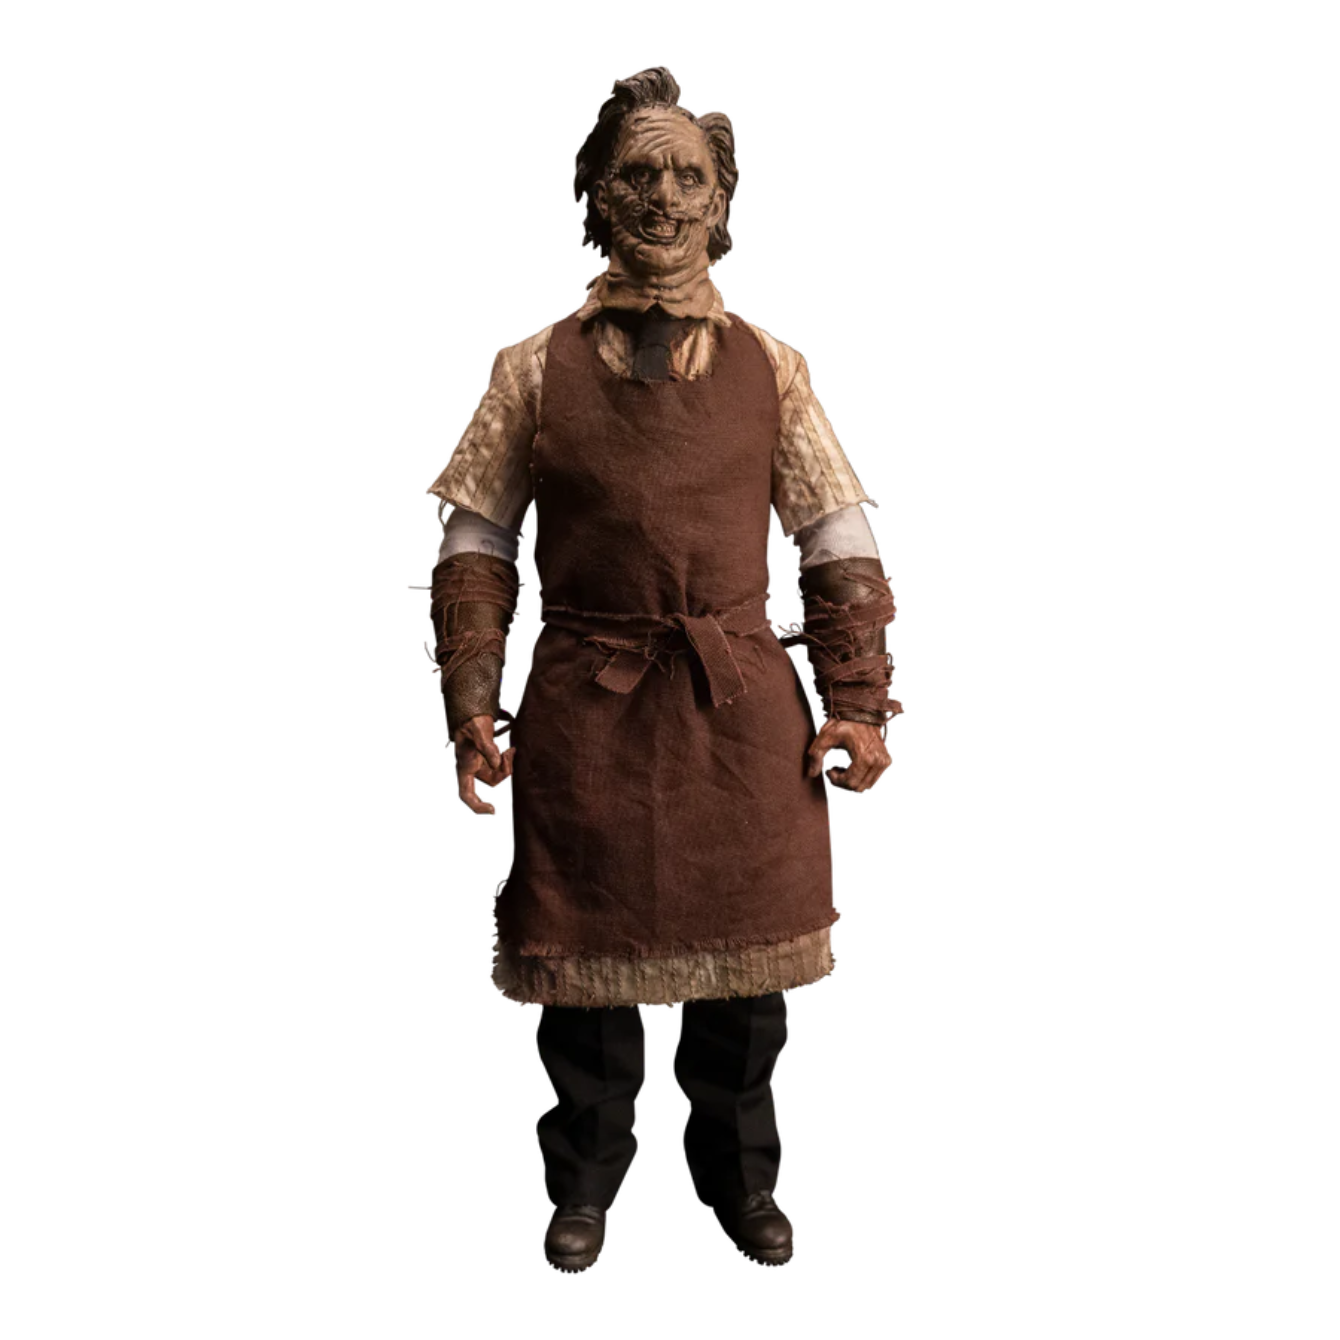 The Texas Chainsaw Massacre 2003- Leatherface 1:6 Scale Action Figure